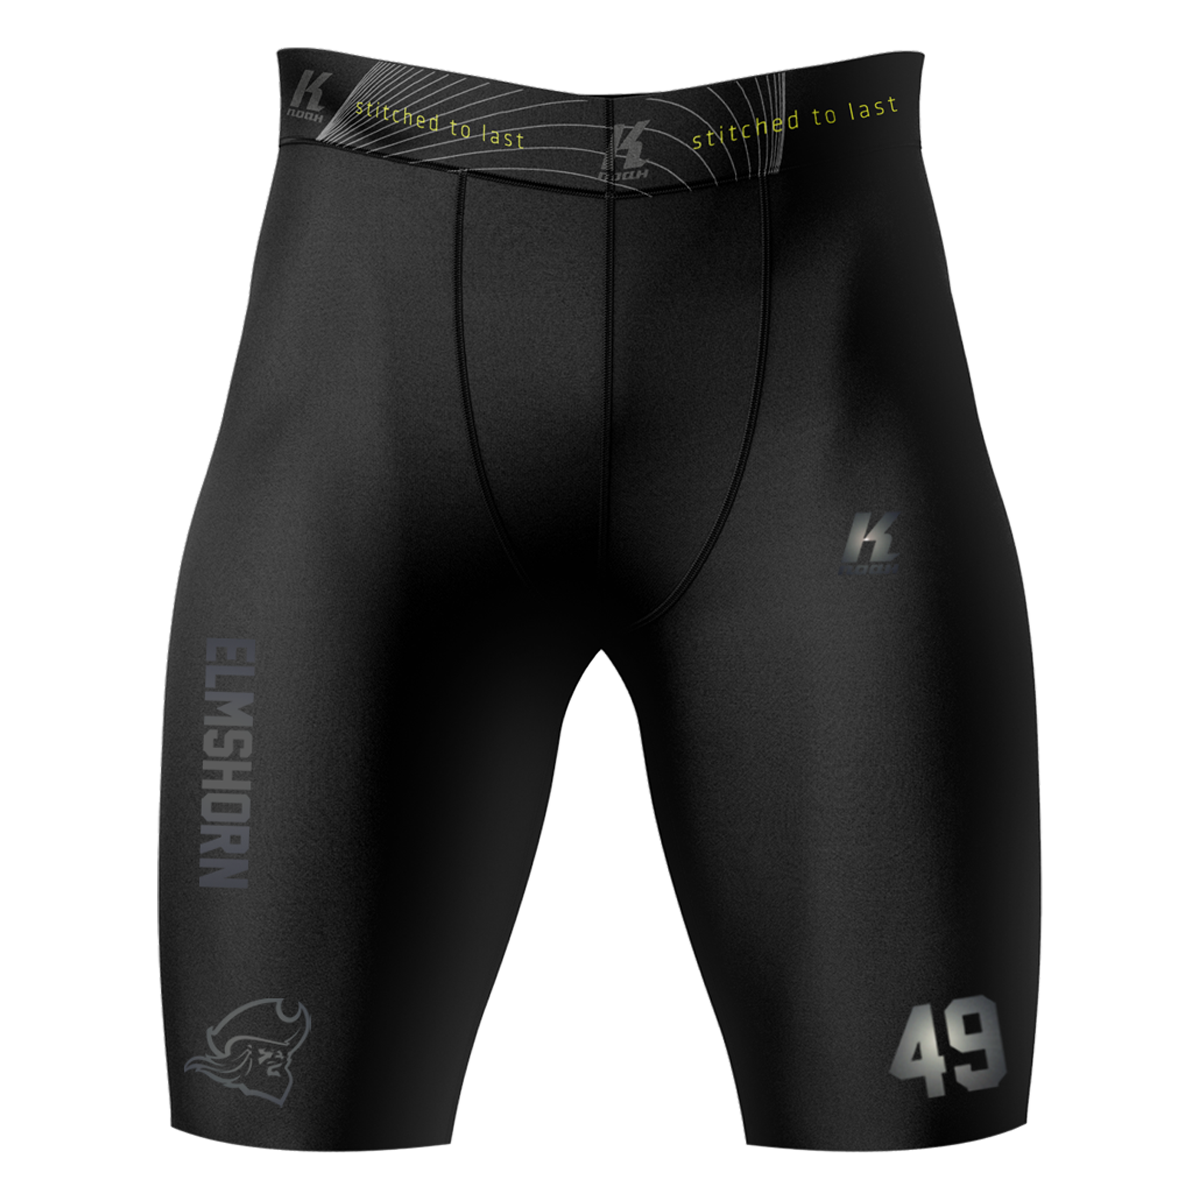 Fighting Pirates "Blackline" K.Tech Fiber Compression Pant BA0512 with Playernumber/Initials